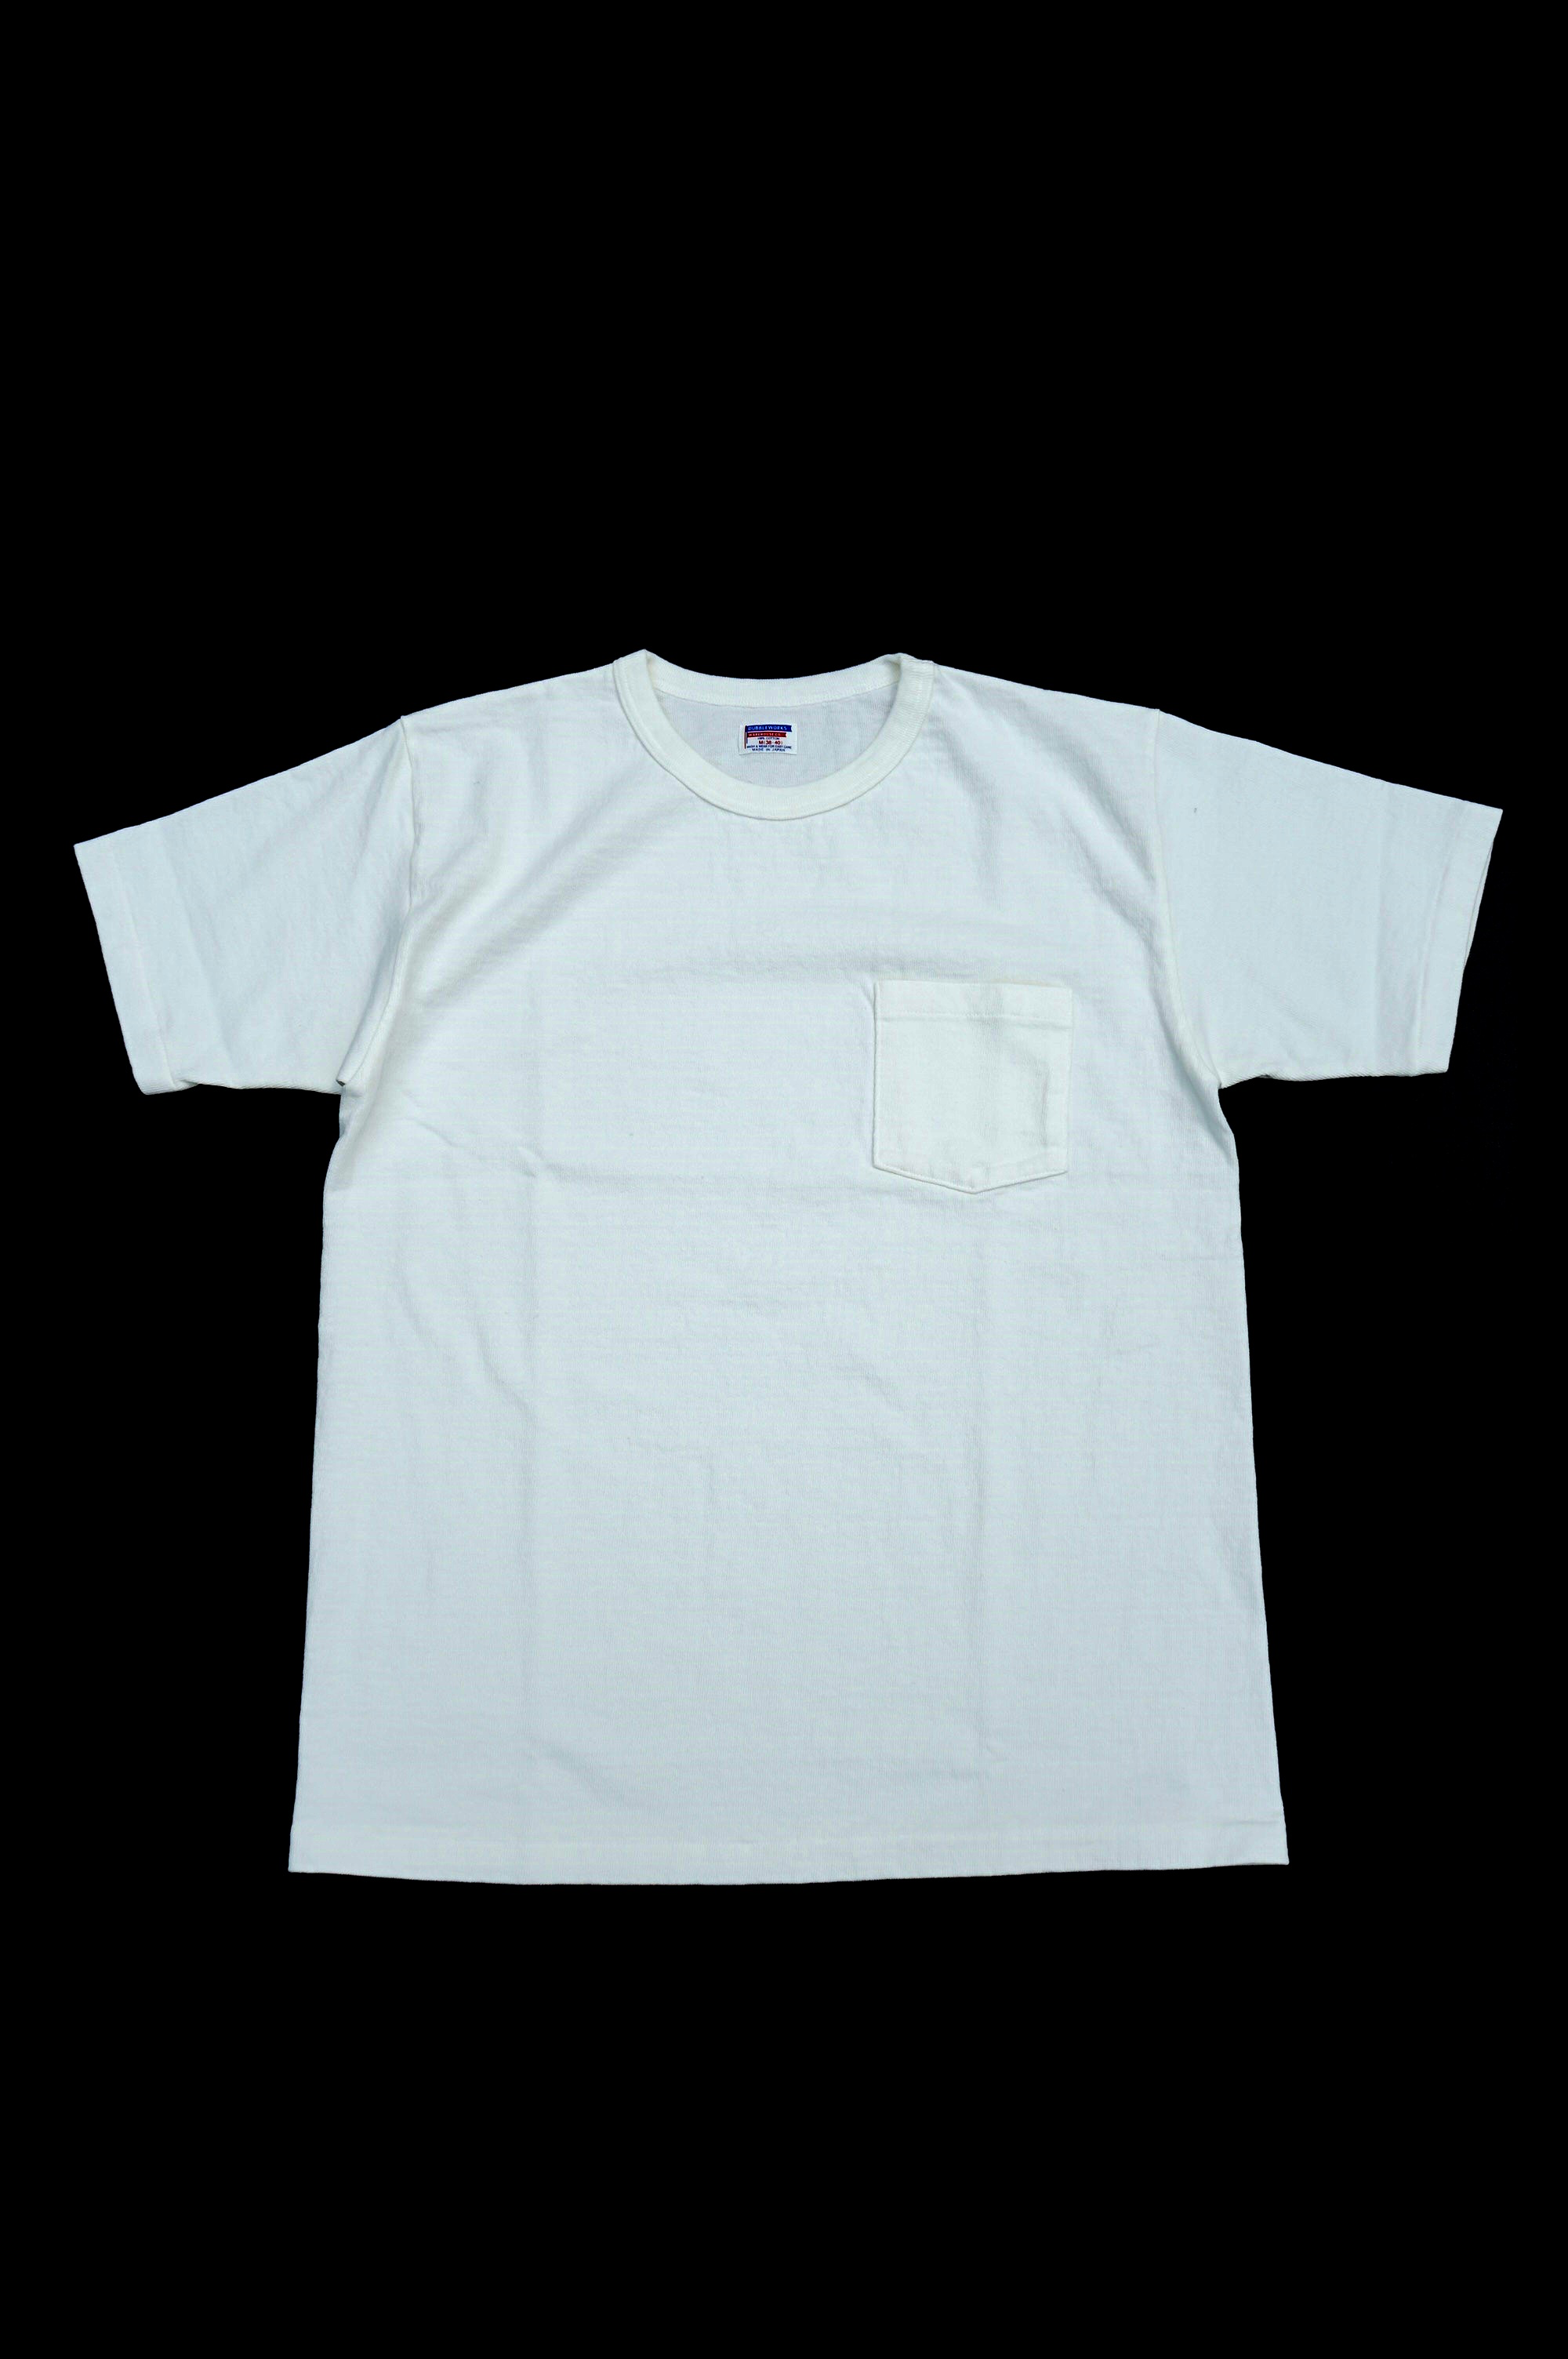 DUBBLE WORKS(ダブルワークス) “HEAVY FABRIC” S/S T-Shirt With a 